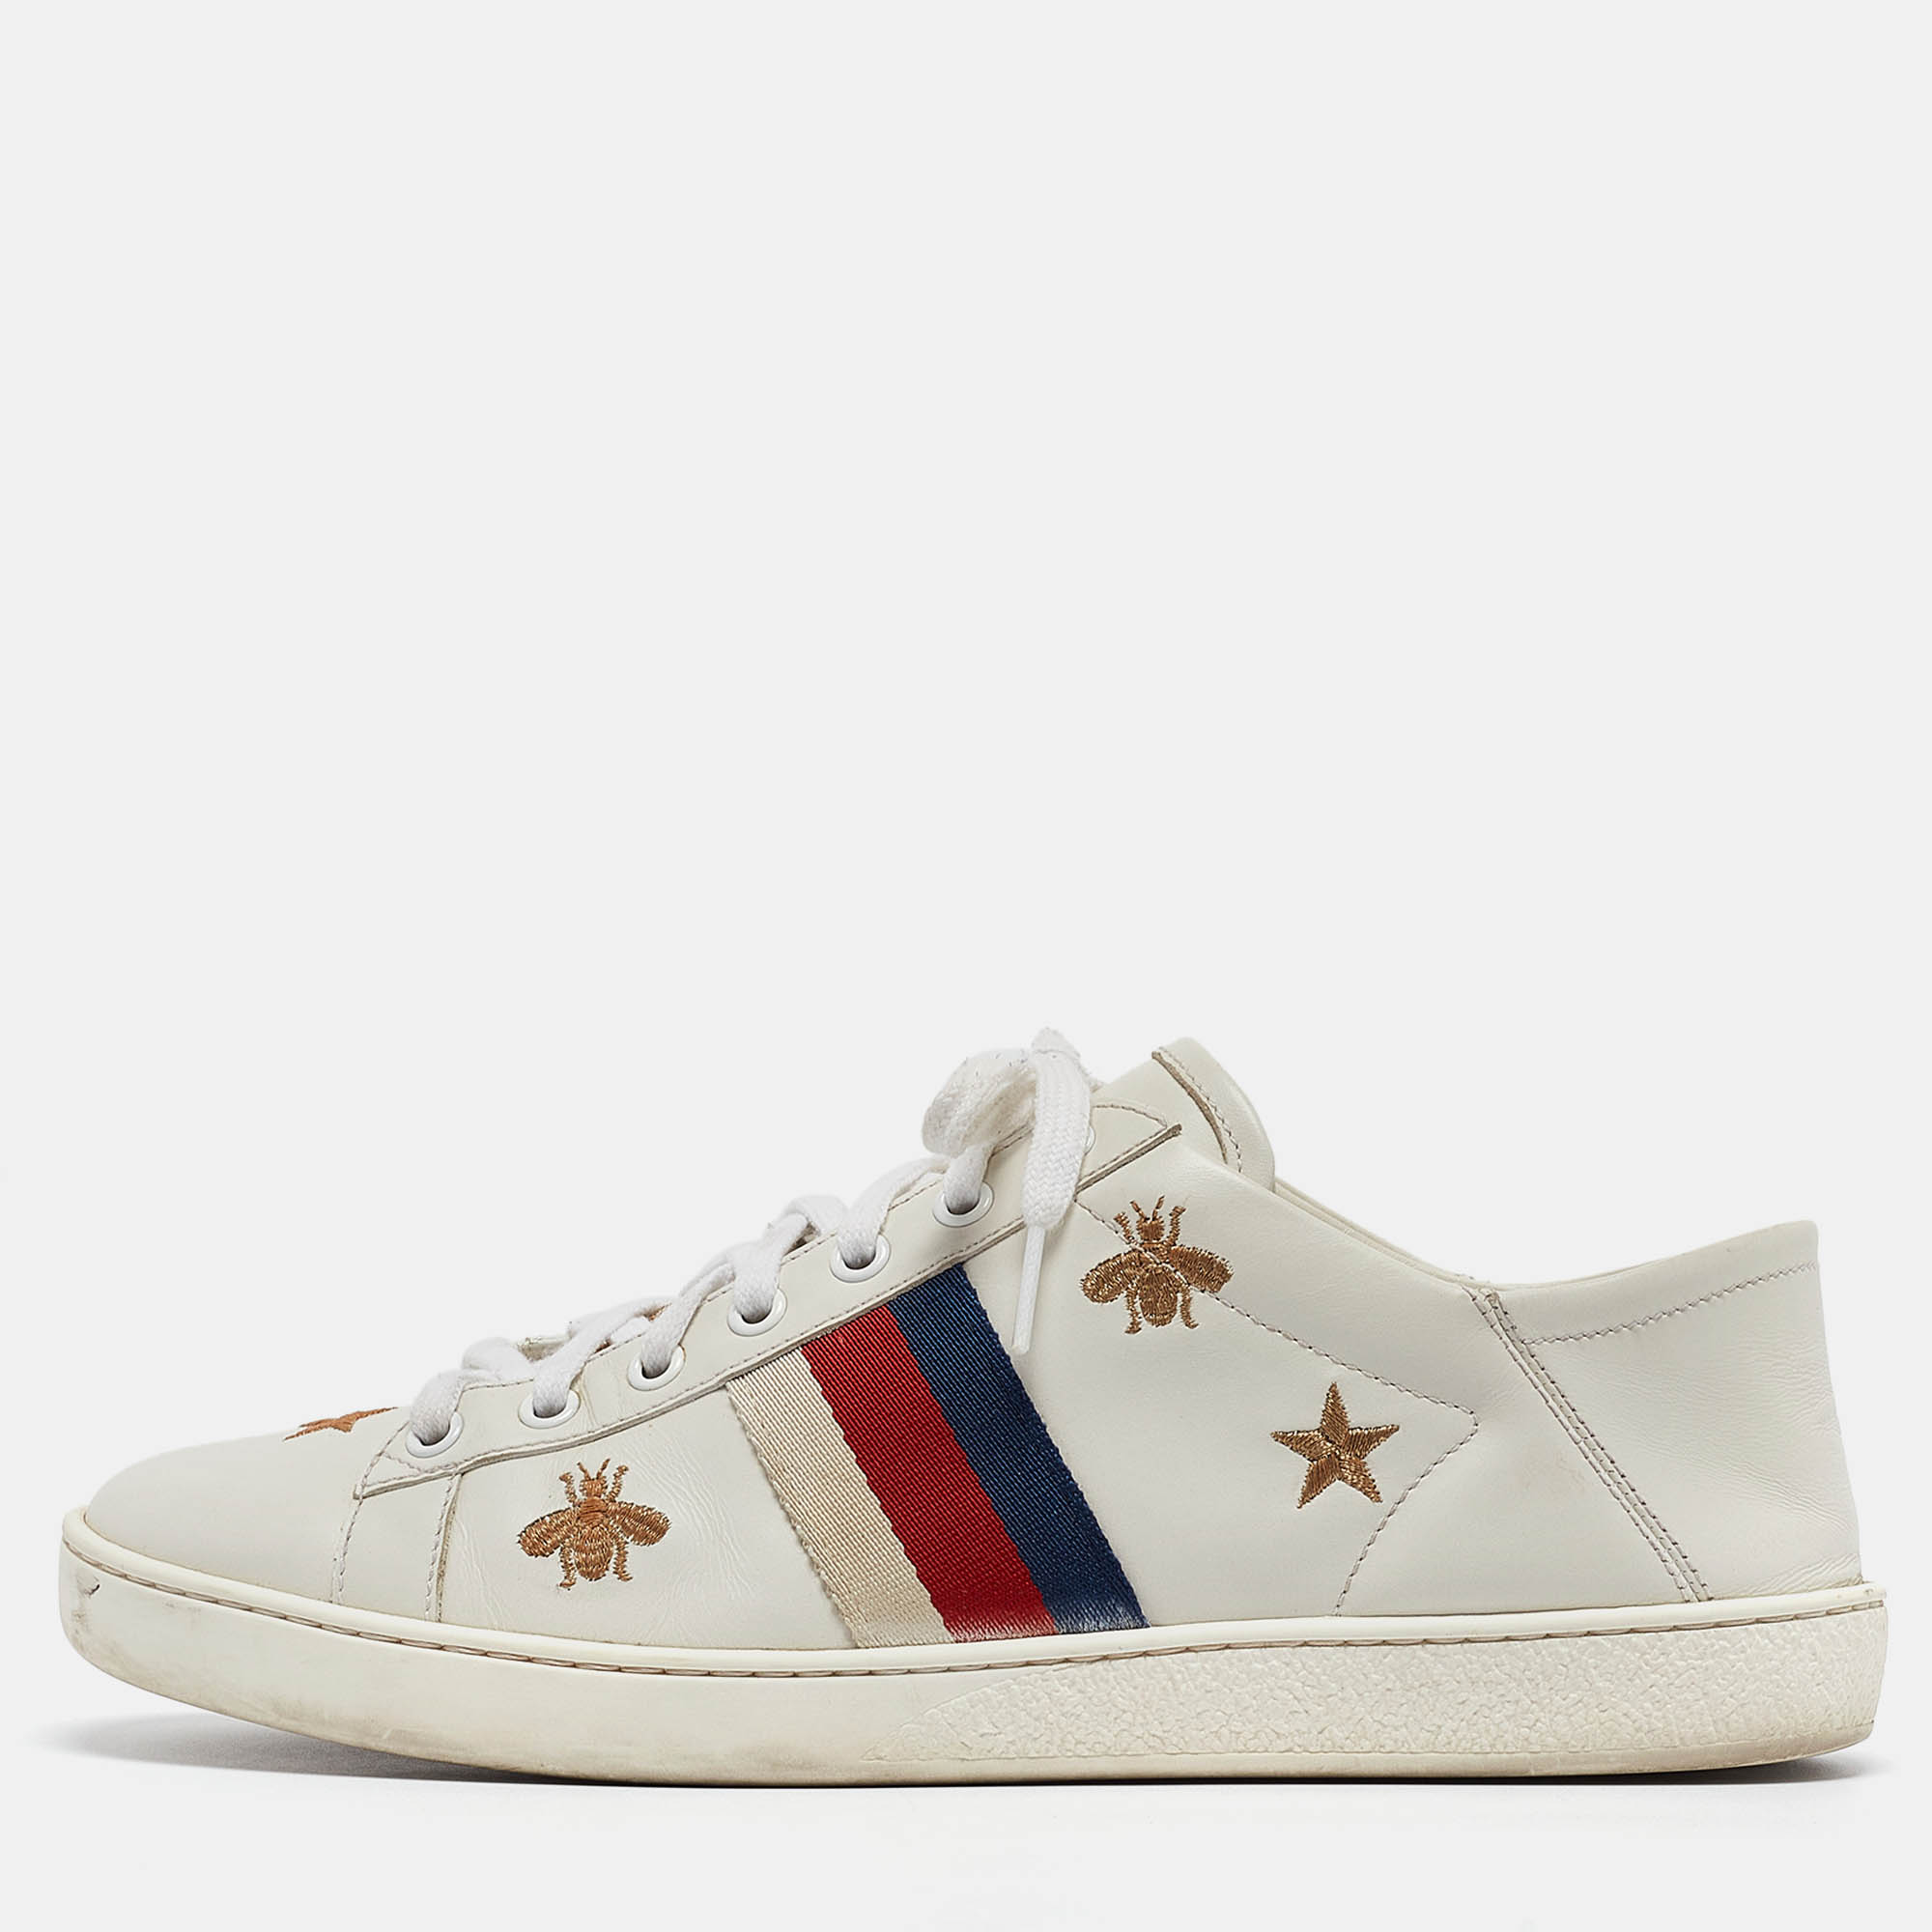 Gucci white leather star and bee embroidered ace sneakers size 39.5